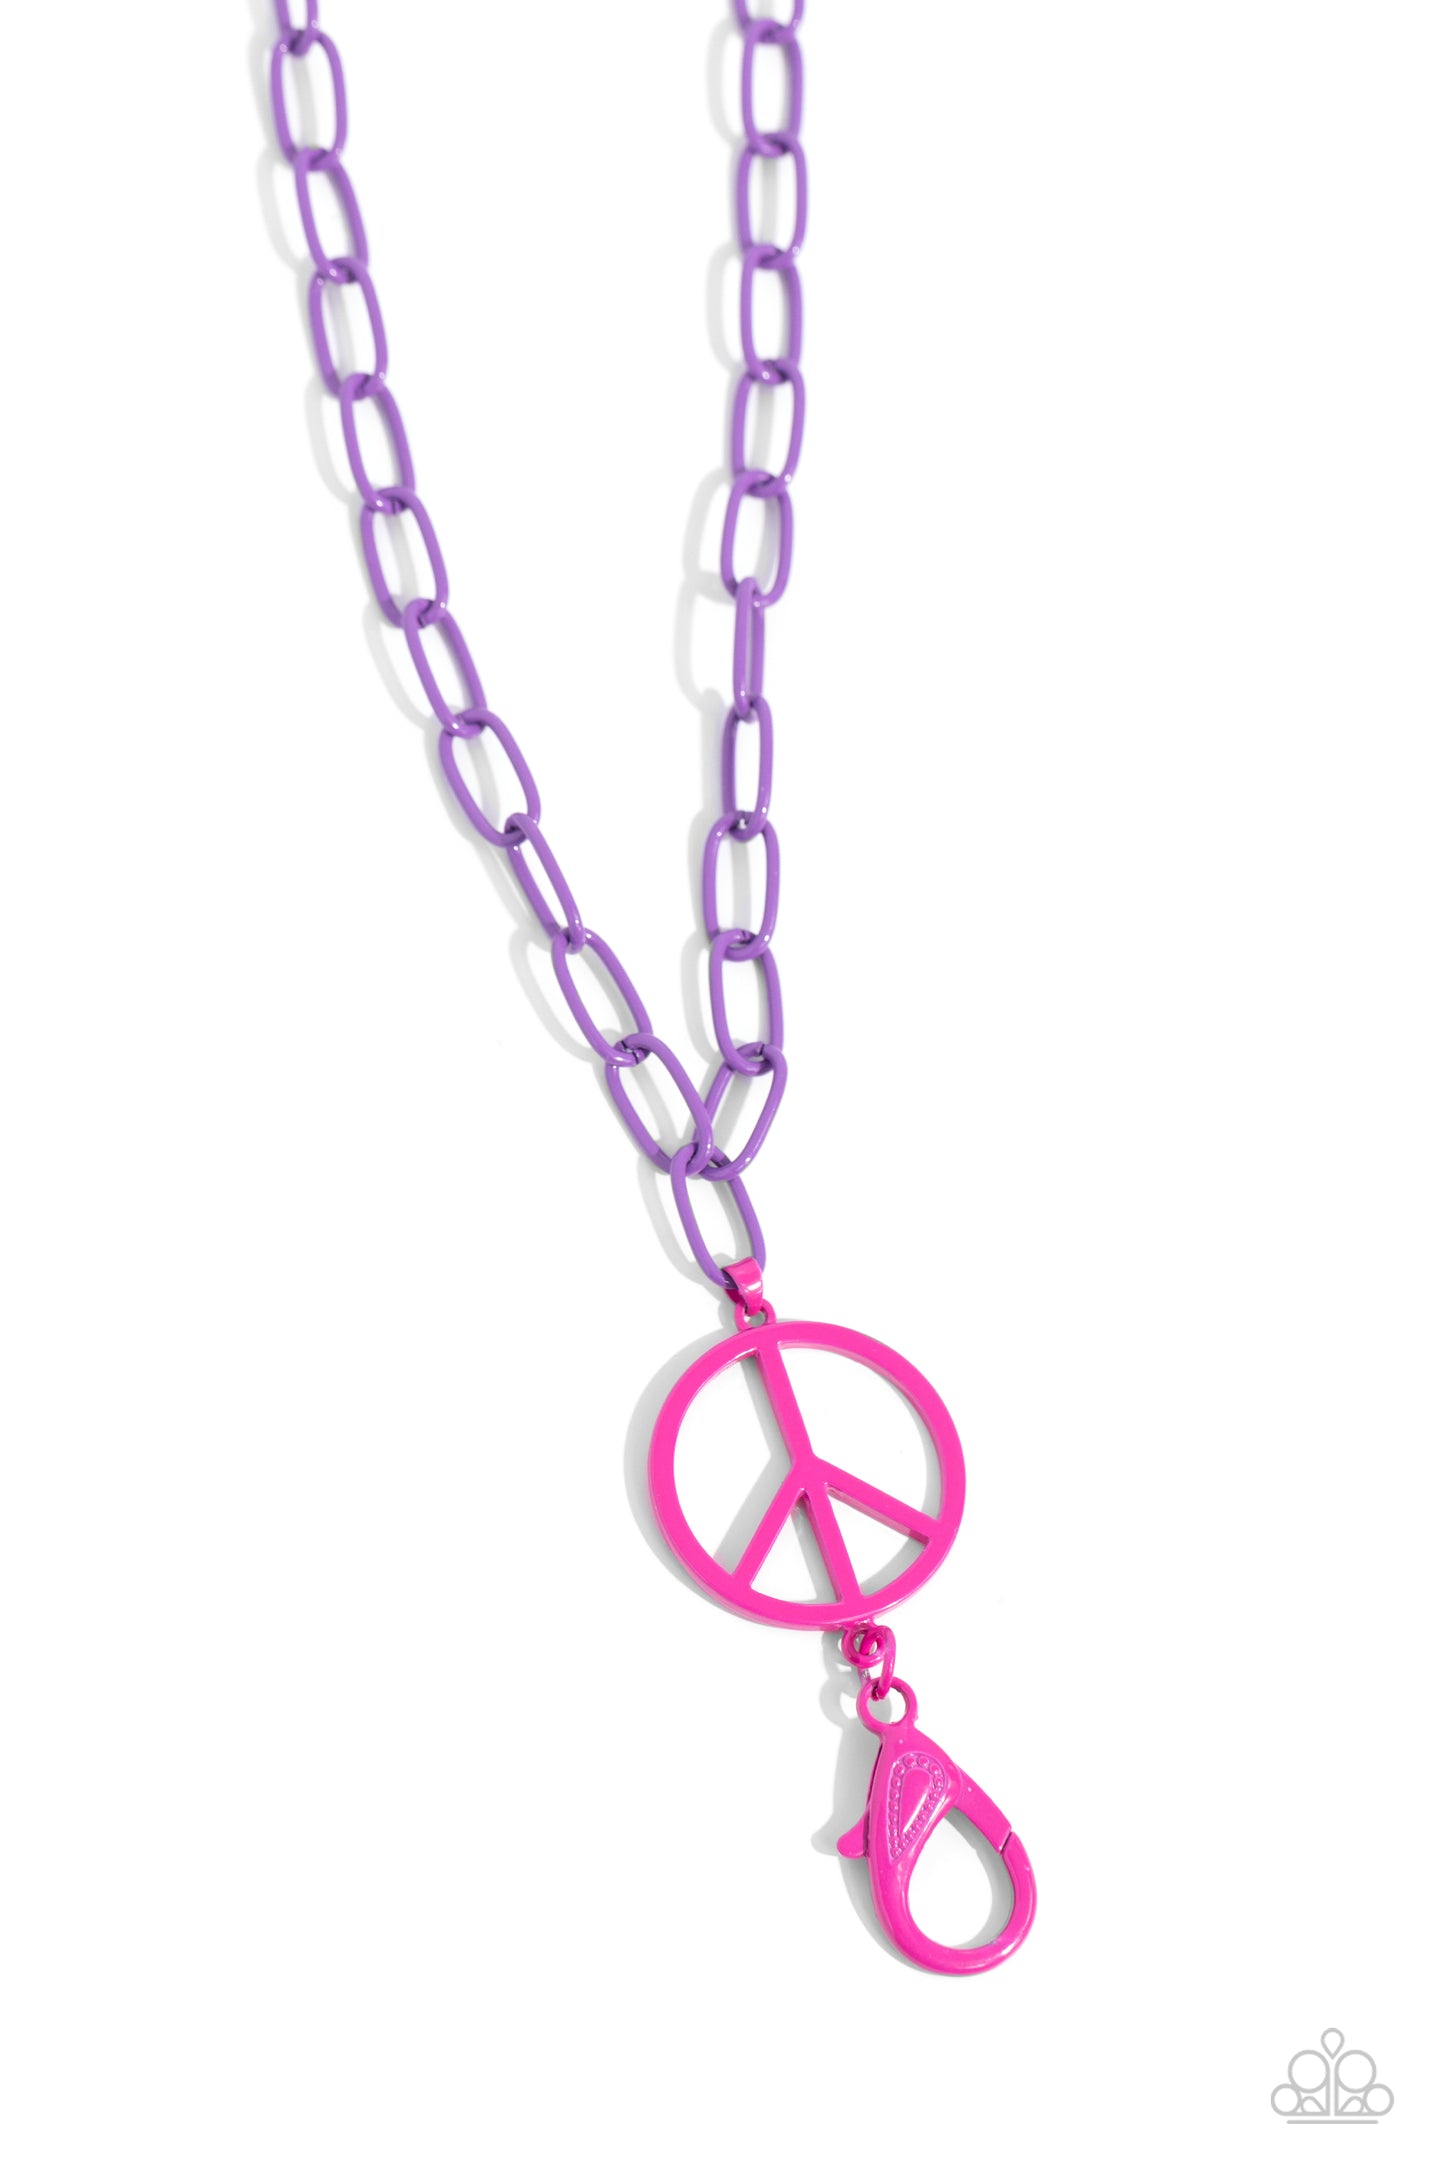 Tranquil Unity Purple Peace Sign Lanyard - Paparazzi Accessories  Featuring a hot pink hue, a peace sign dangles from a purple-painted paperclip chain for a groovy pop of color along the chest. A hot pink lobster clasp hangs from the bottom of the design to allow a name badge or other item to be attached. Features an adjustable clasp closure.  Sold as one individual lanyard. Includes one pair of matching earrings.  Sku:  P2LN-PRXX-025XX